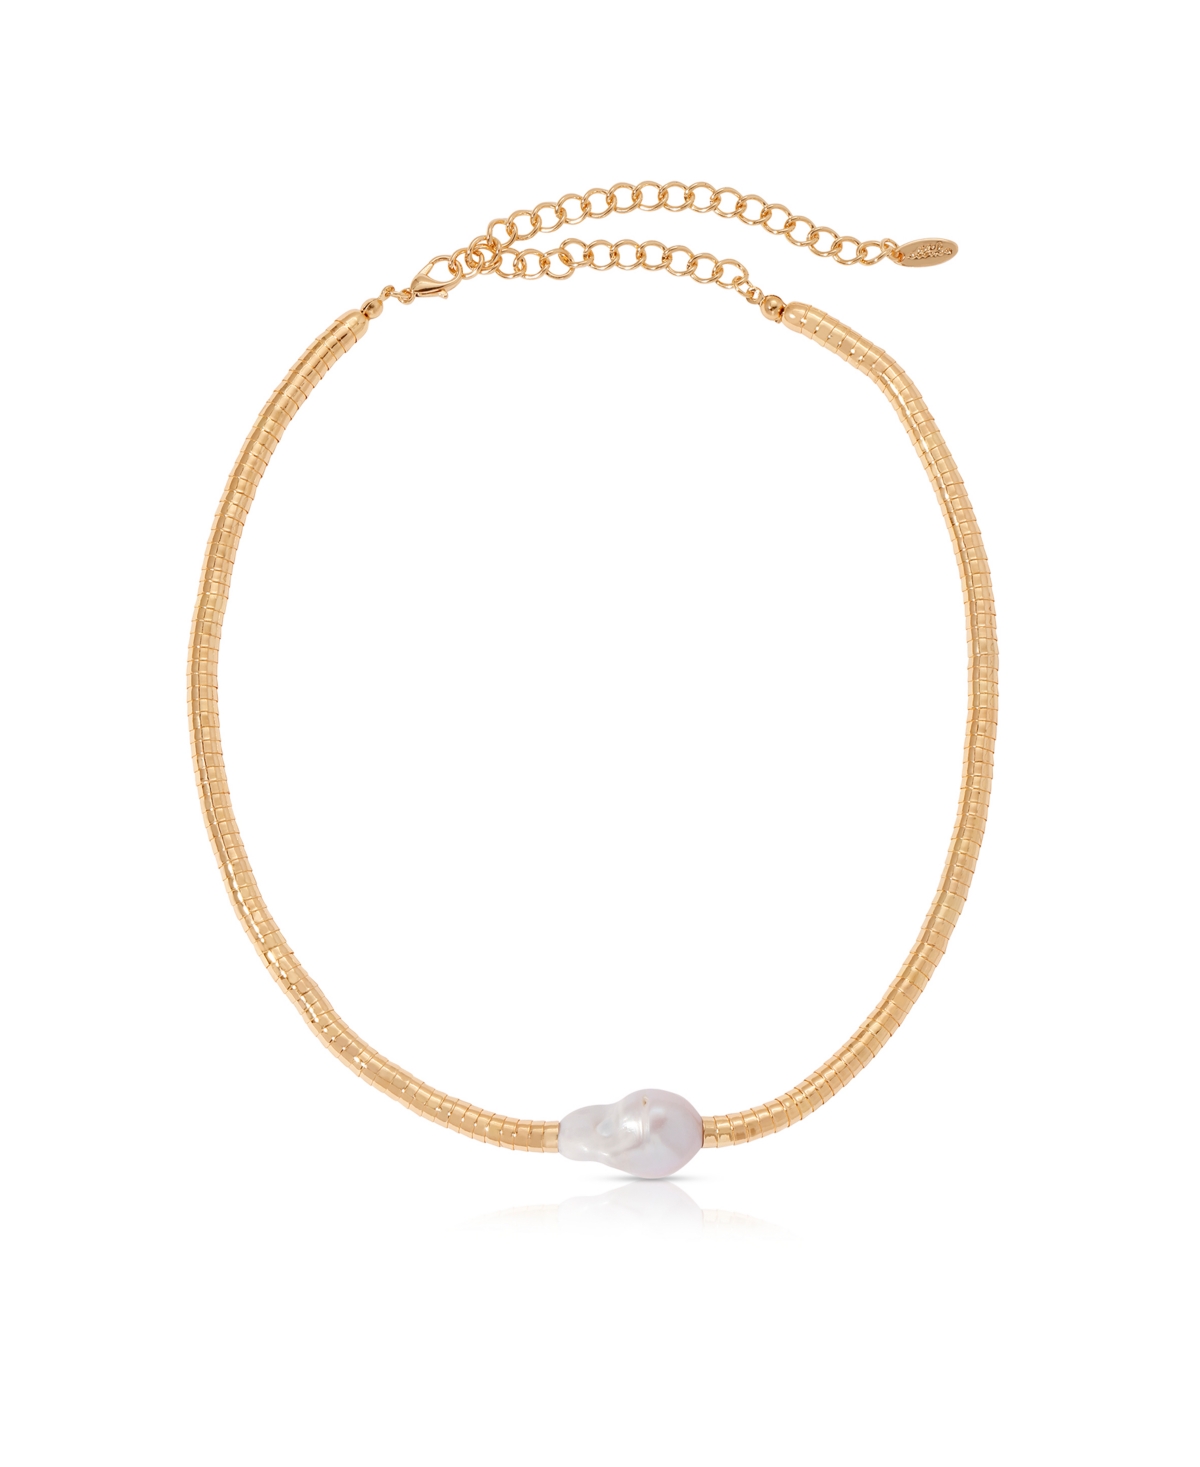 Liquid 18K Gold-Plated and Cultured Freshwater Pearl Choker - Gold